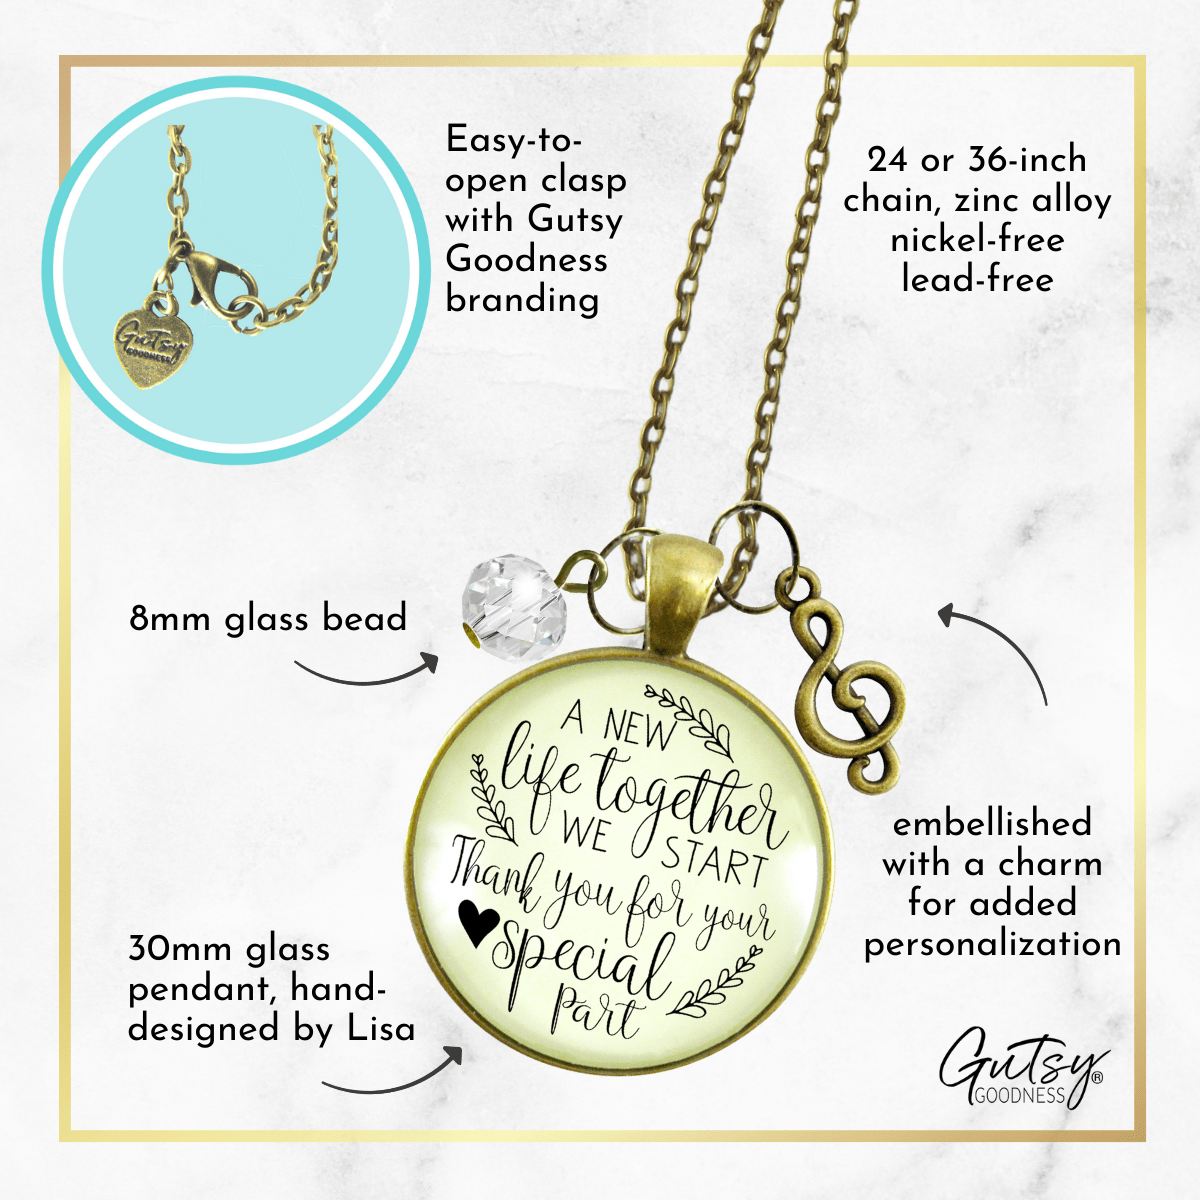 Gutsy Goodness Wedding Singer Gift Necklace New Life Musician Soloist G Clef Charm - Gutsy Goodness Handmade Jewelry;Wedding Singer Gift Necklace New Life Musician Soloist G Clef Charm - Gutsy Goodness Handmade Jewelry Gifts